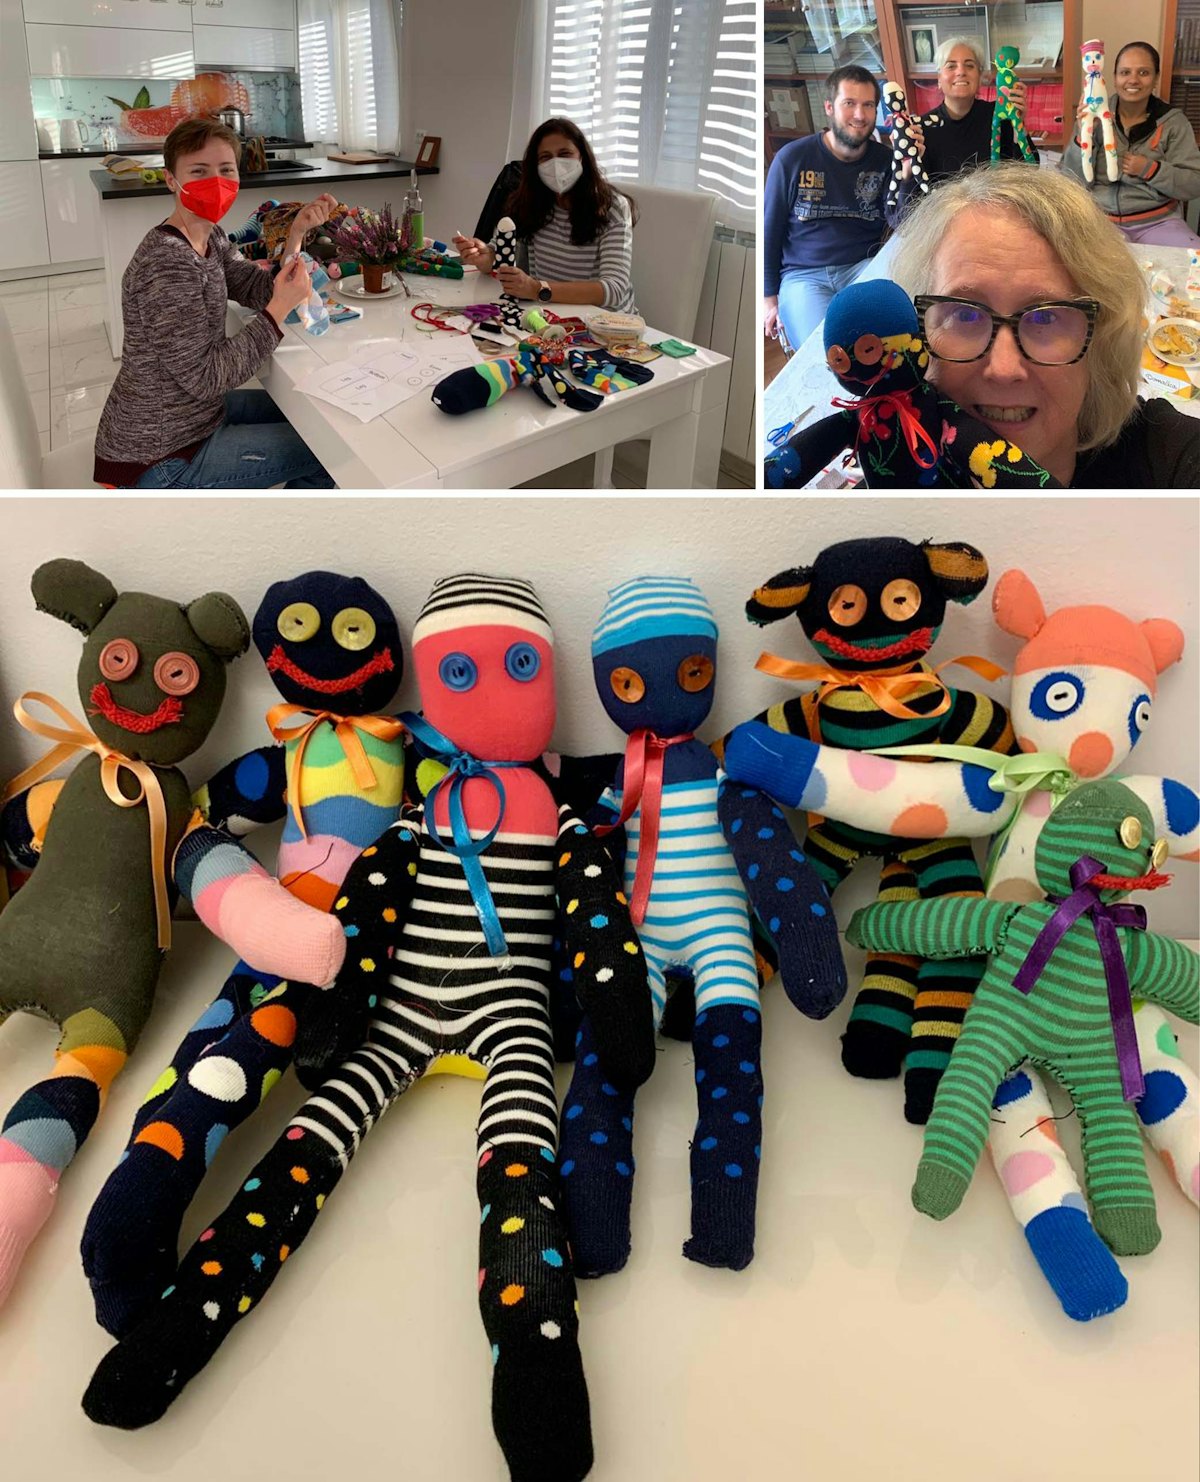 In Croatia, a group of friends inspired by ‘Abdu’l-Bahá’s spirit of generosity have been creating dolls that will be gifted to children at a nearby orphanage.